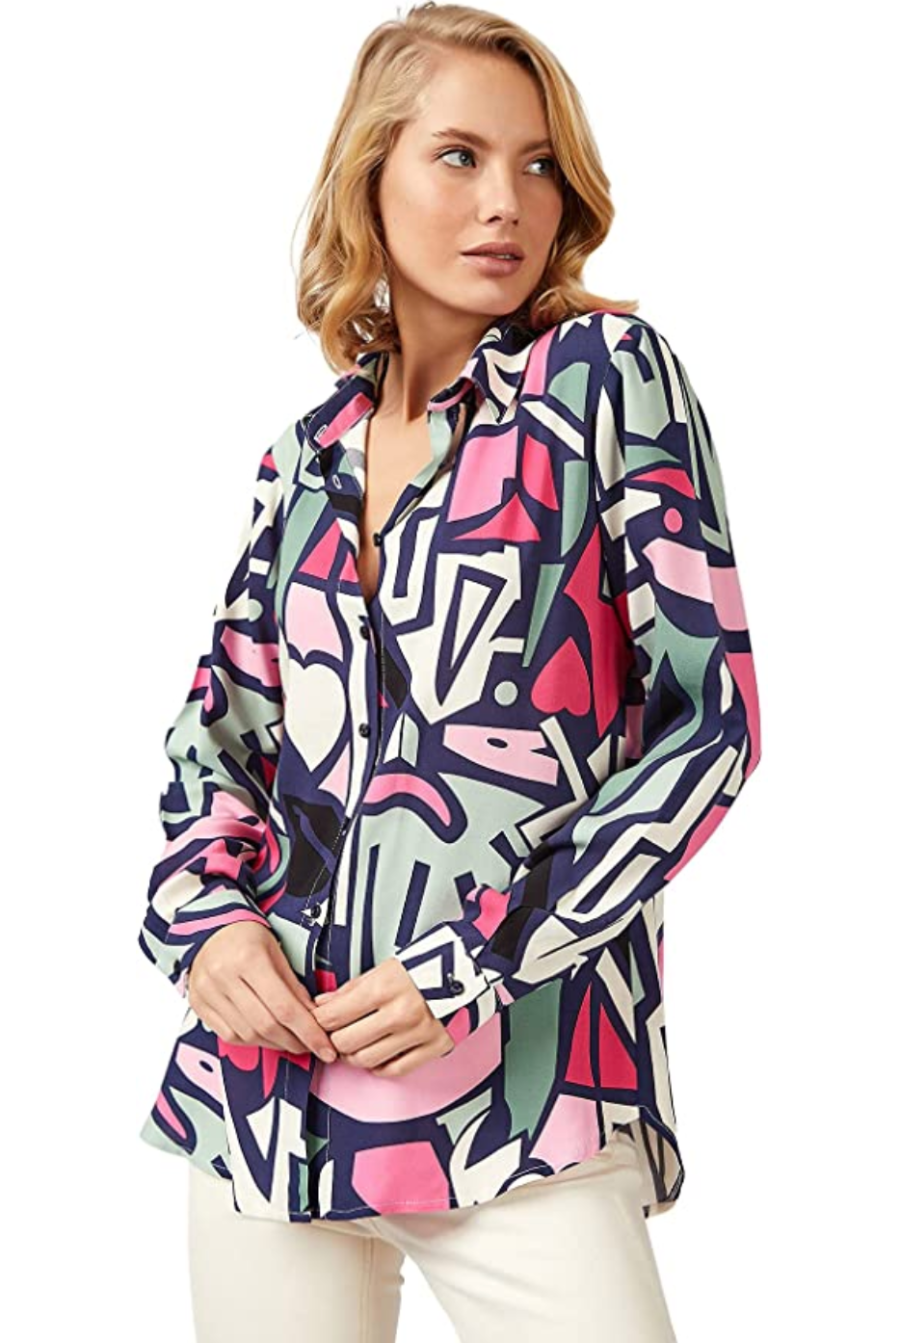 Big Dart Button-Down Printed Blouse Is Our Latest Closet Must-Have